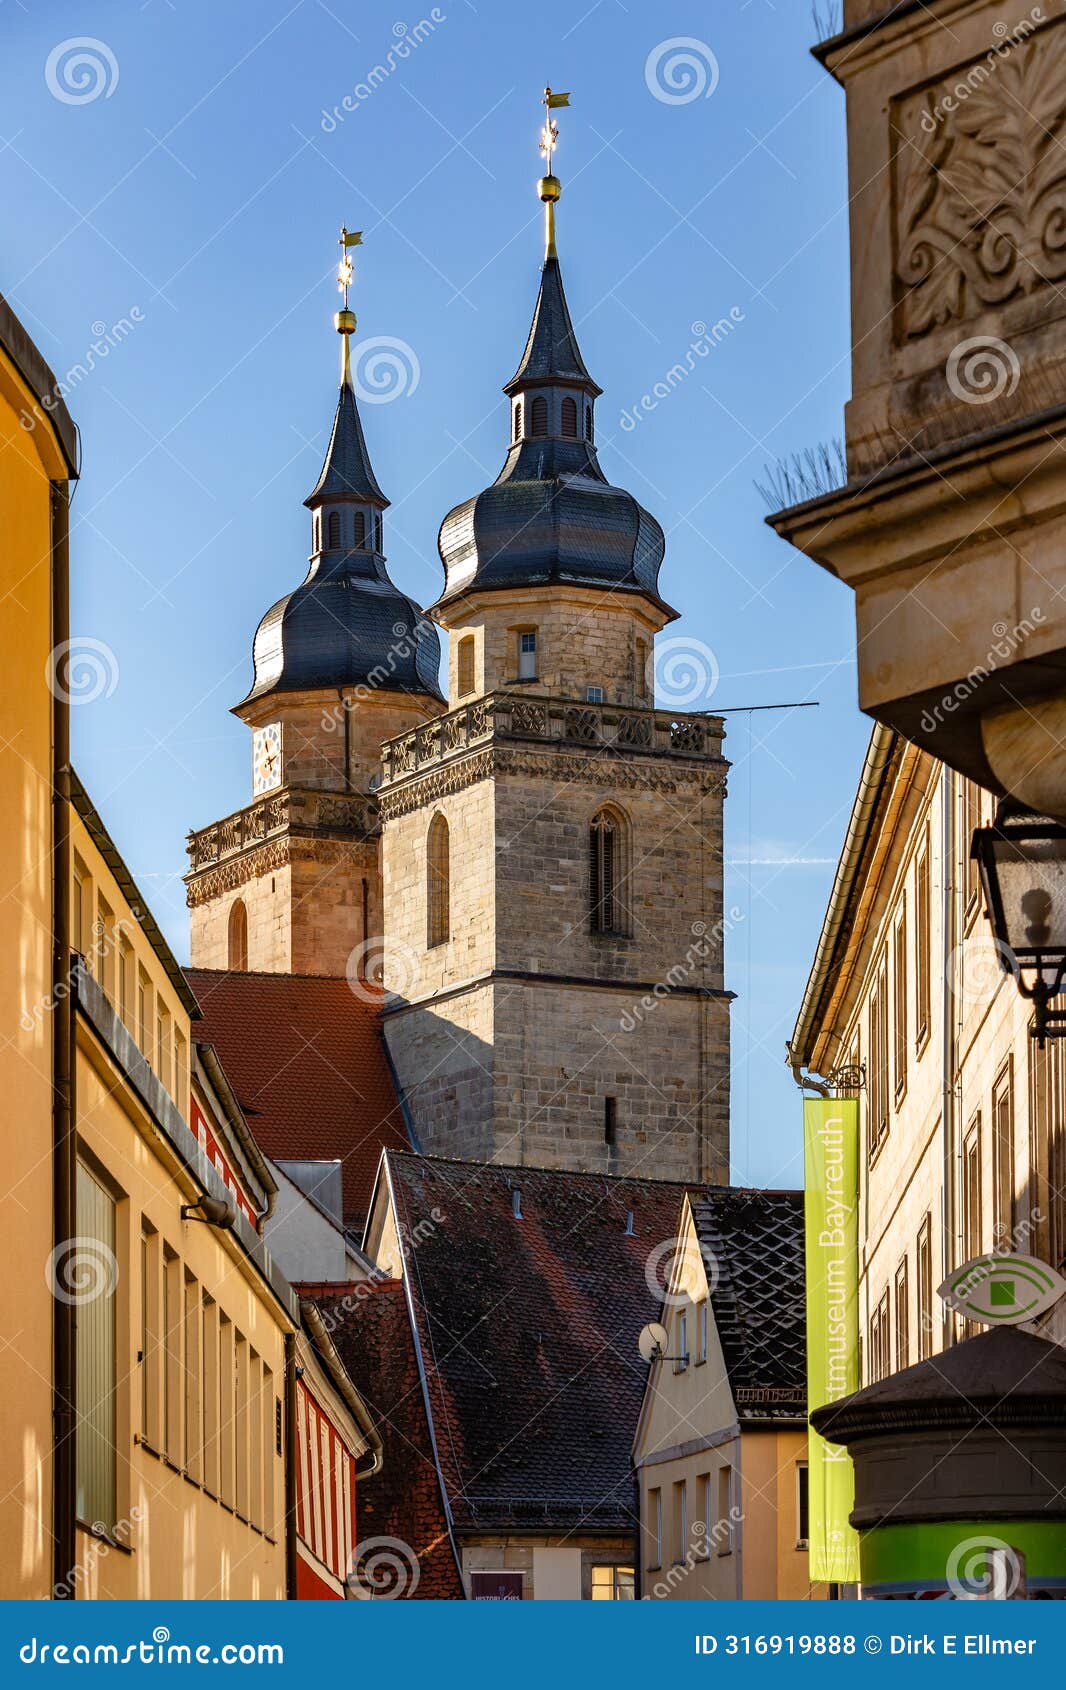 the steeples of the stadtkirche in bayreuth old town